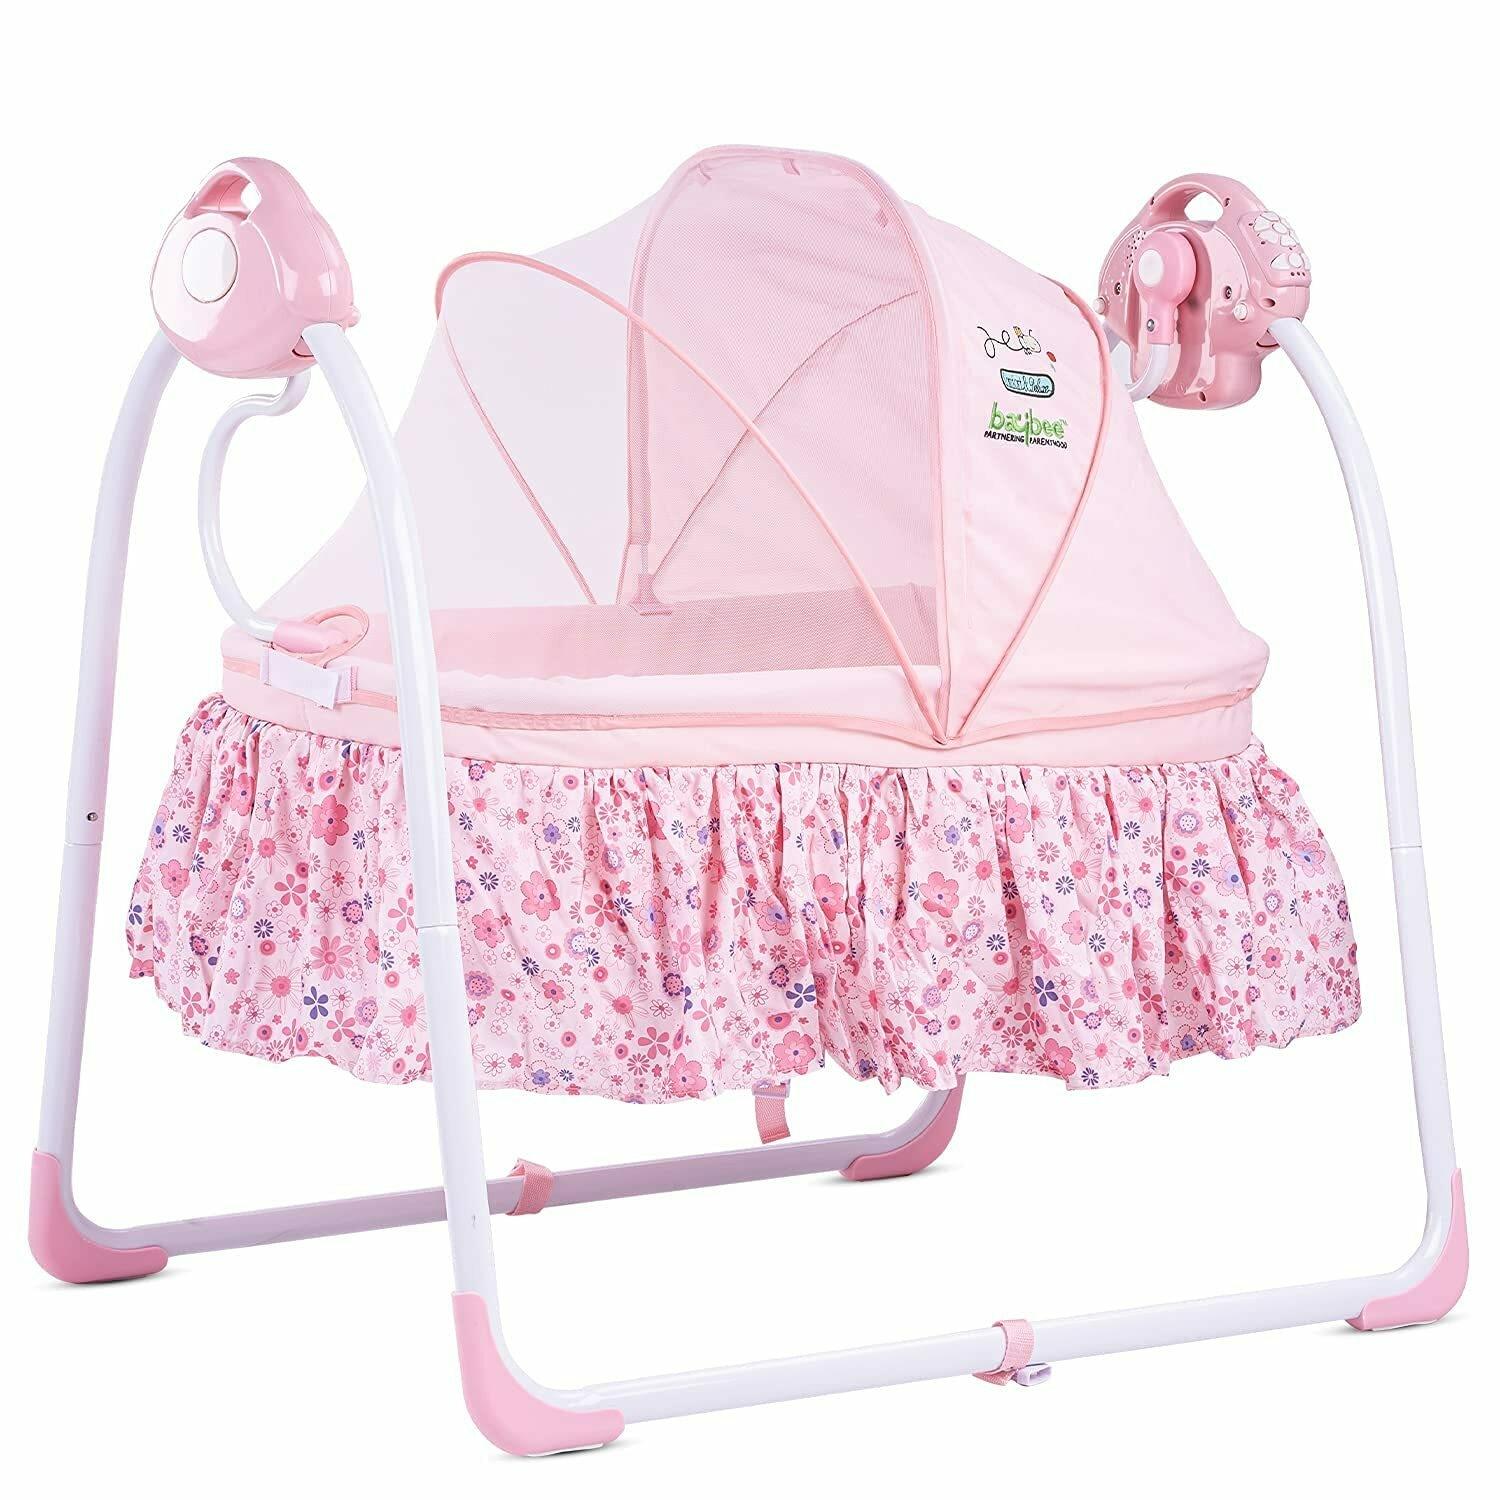 CBBAY Electric Cradle for Baby Pink Automatic Baby Basket Electric Rocking Multi-Function Baby Swing Cradle Bed with Music 